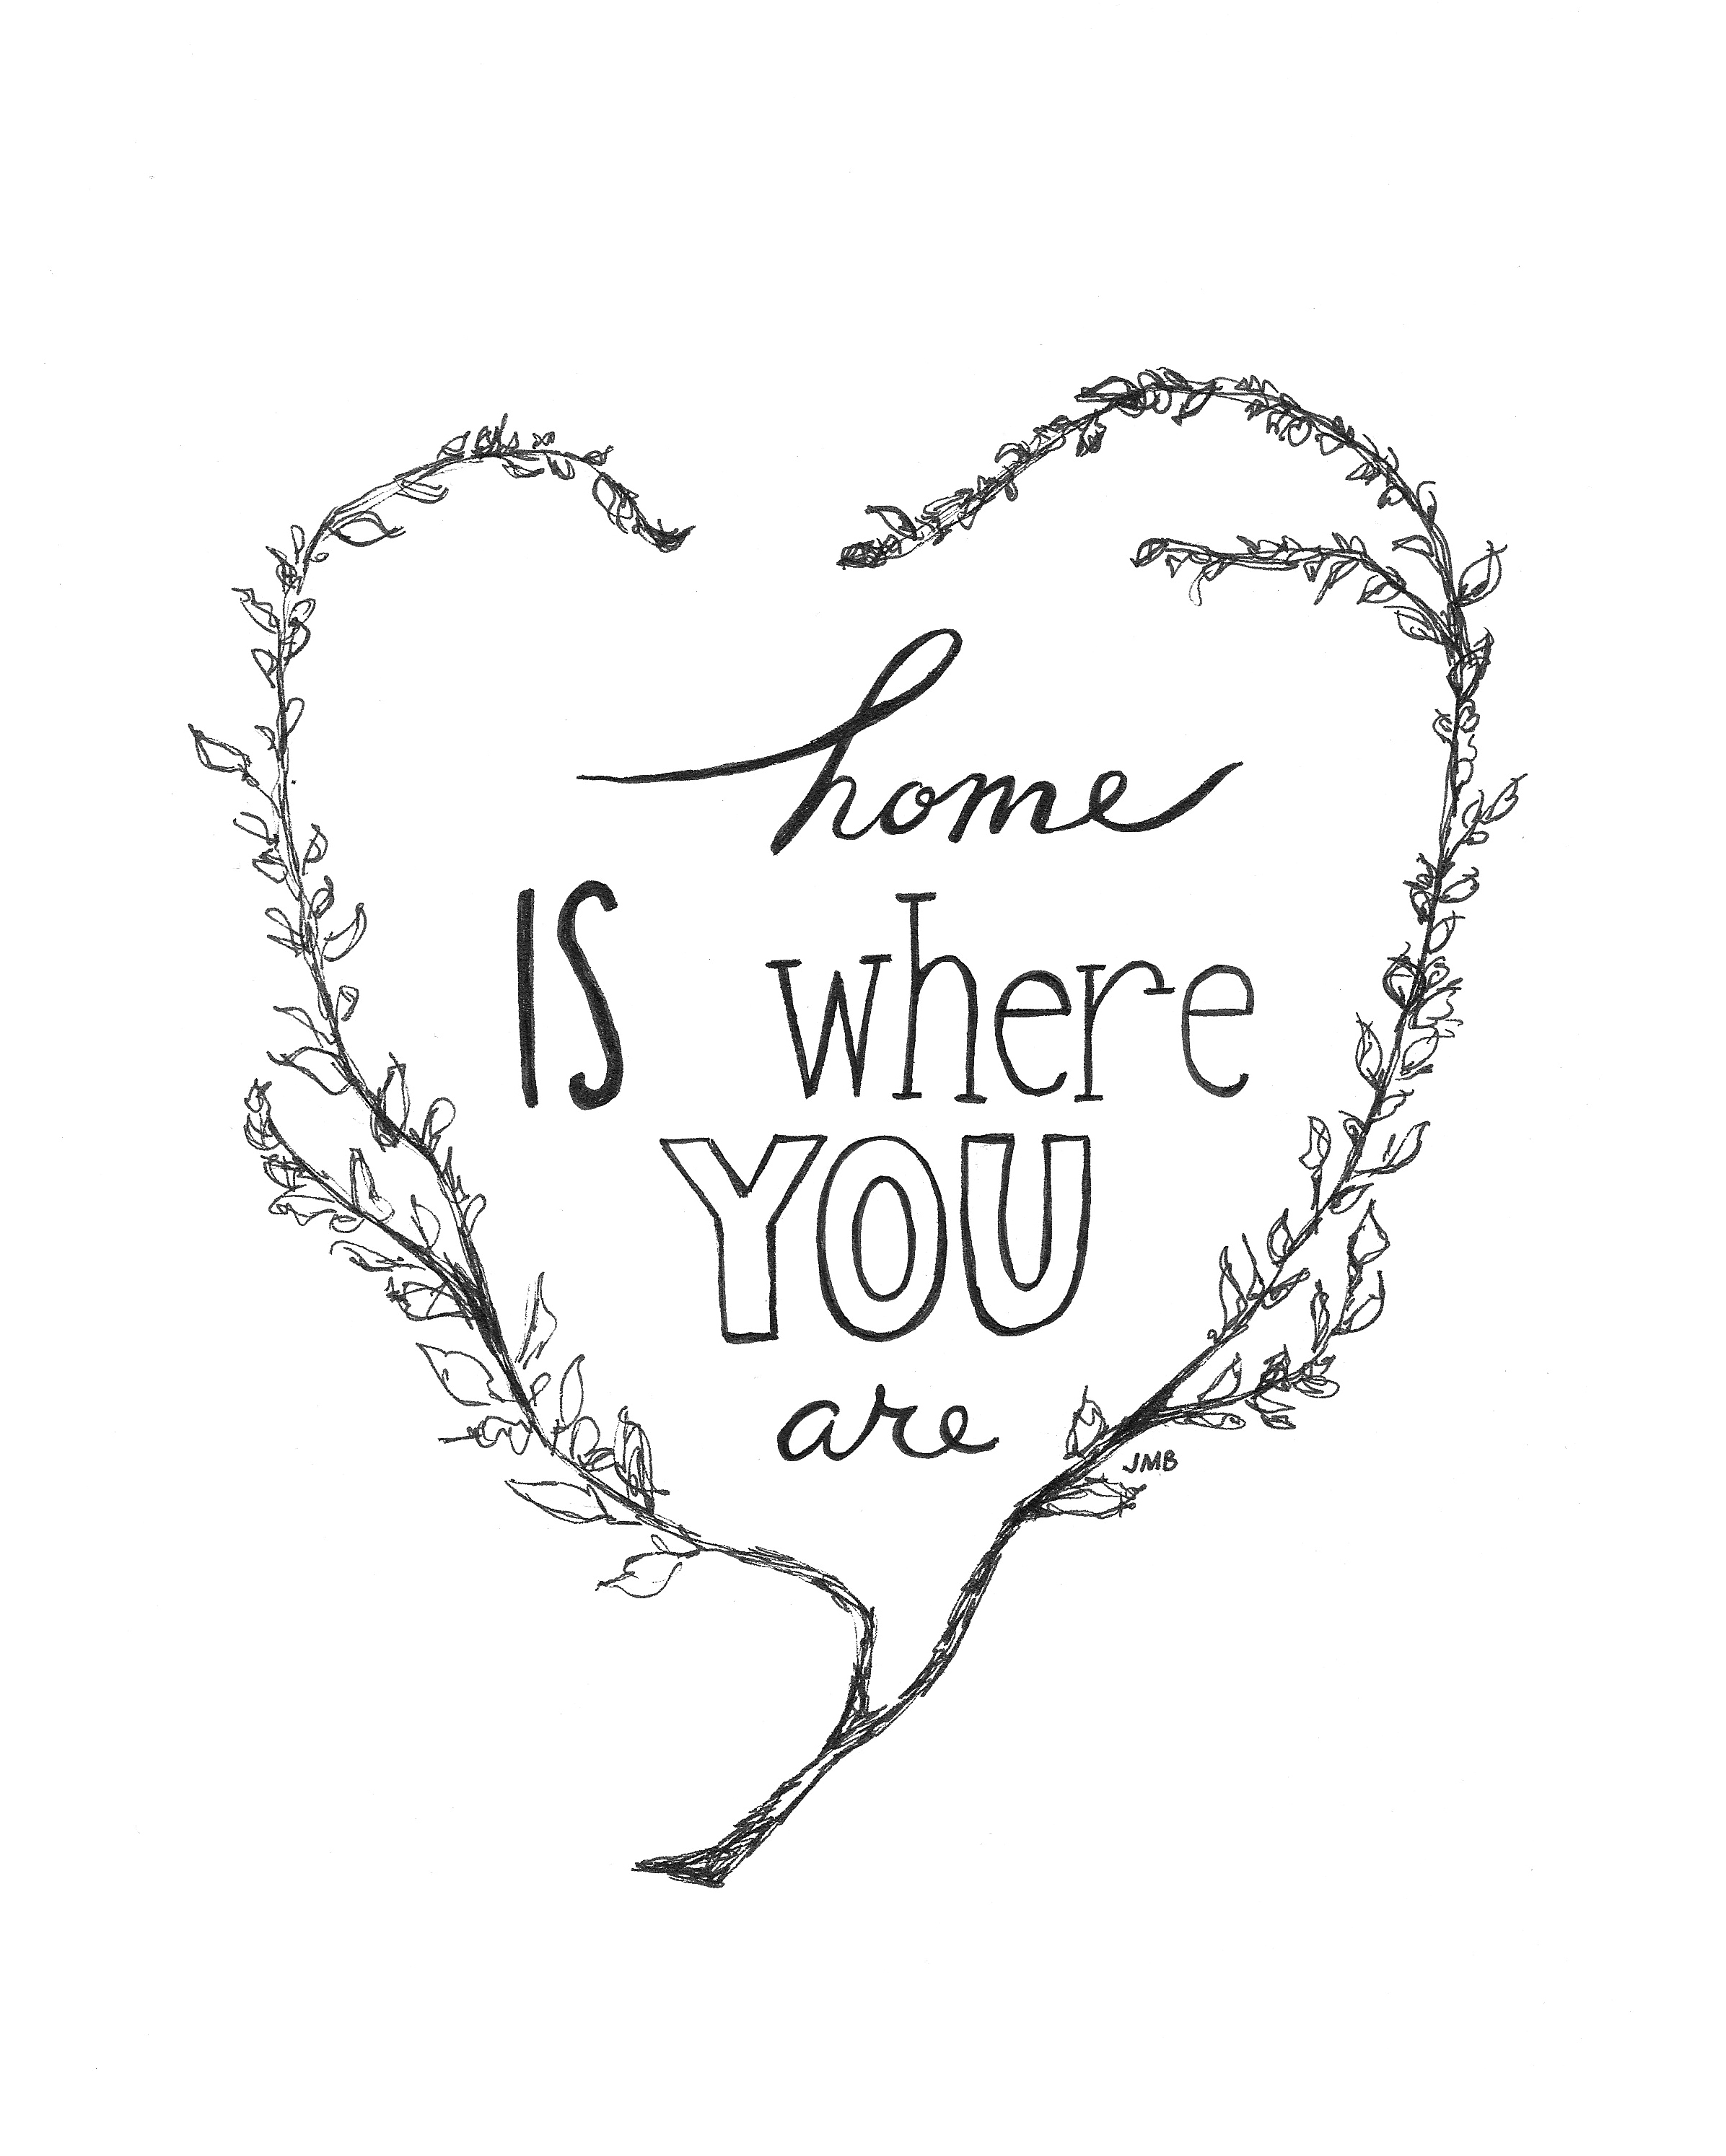 Fun is where you are. Home is where you are. Home is where the Heart is. Home is where you are картина. Картина Home is where Heart is.